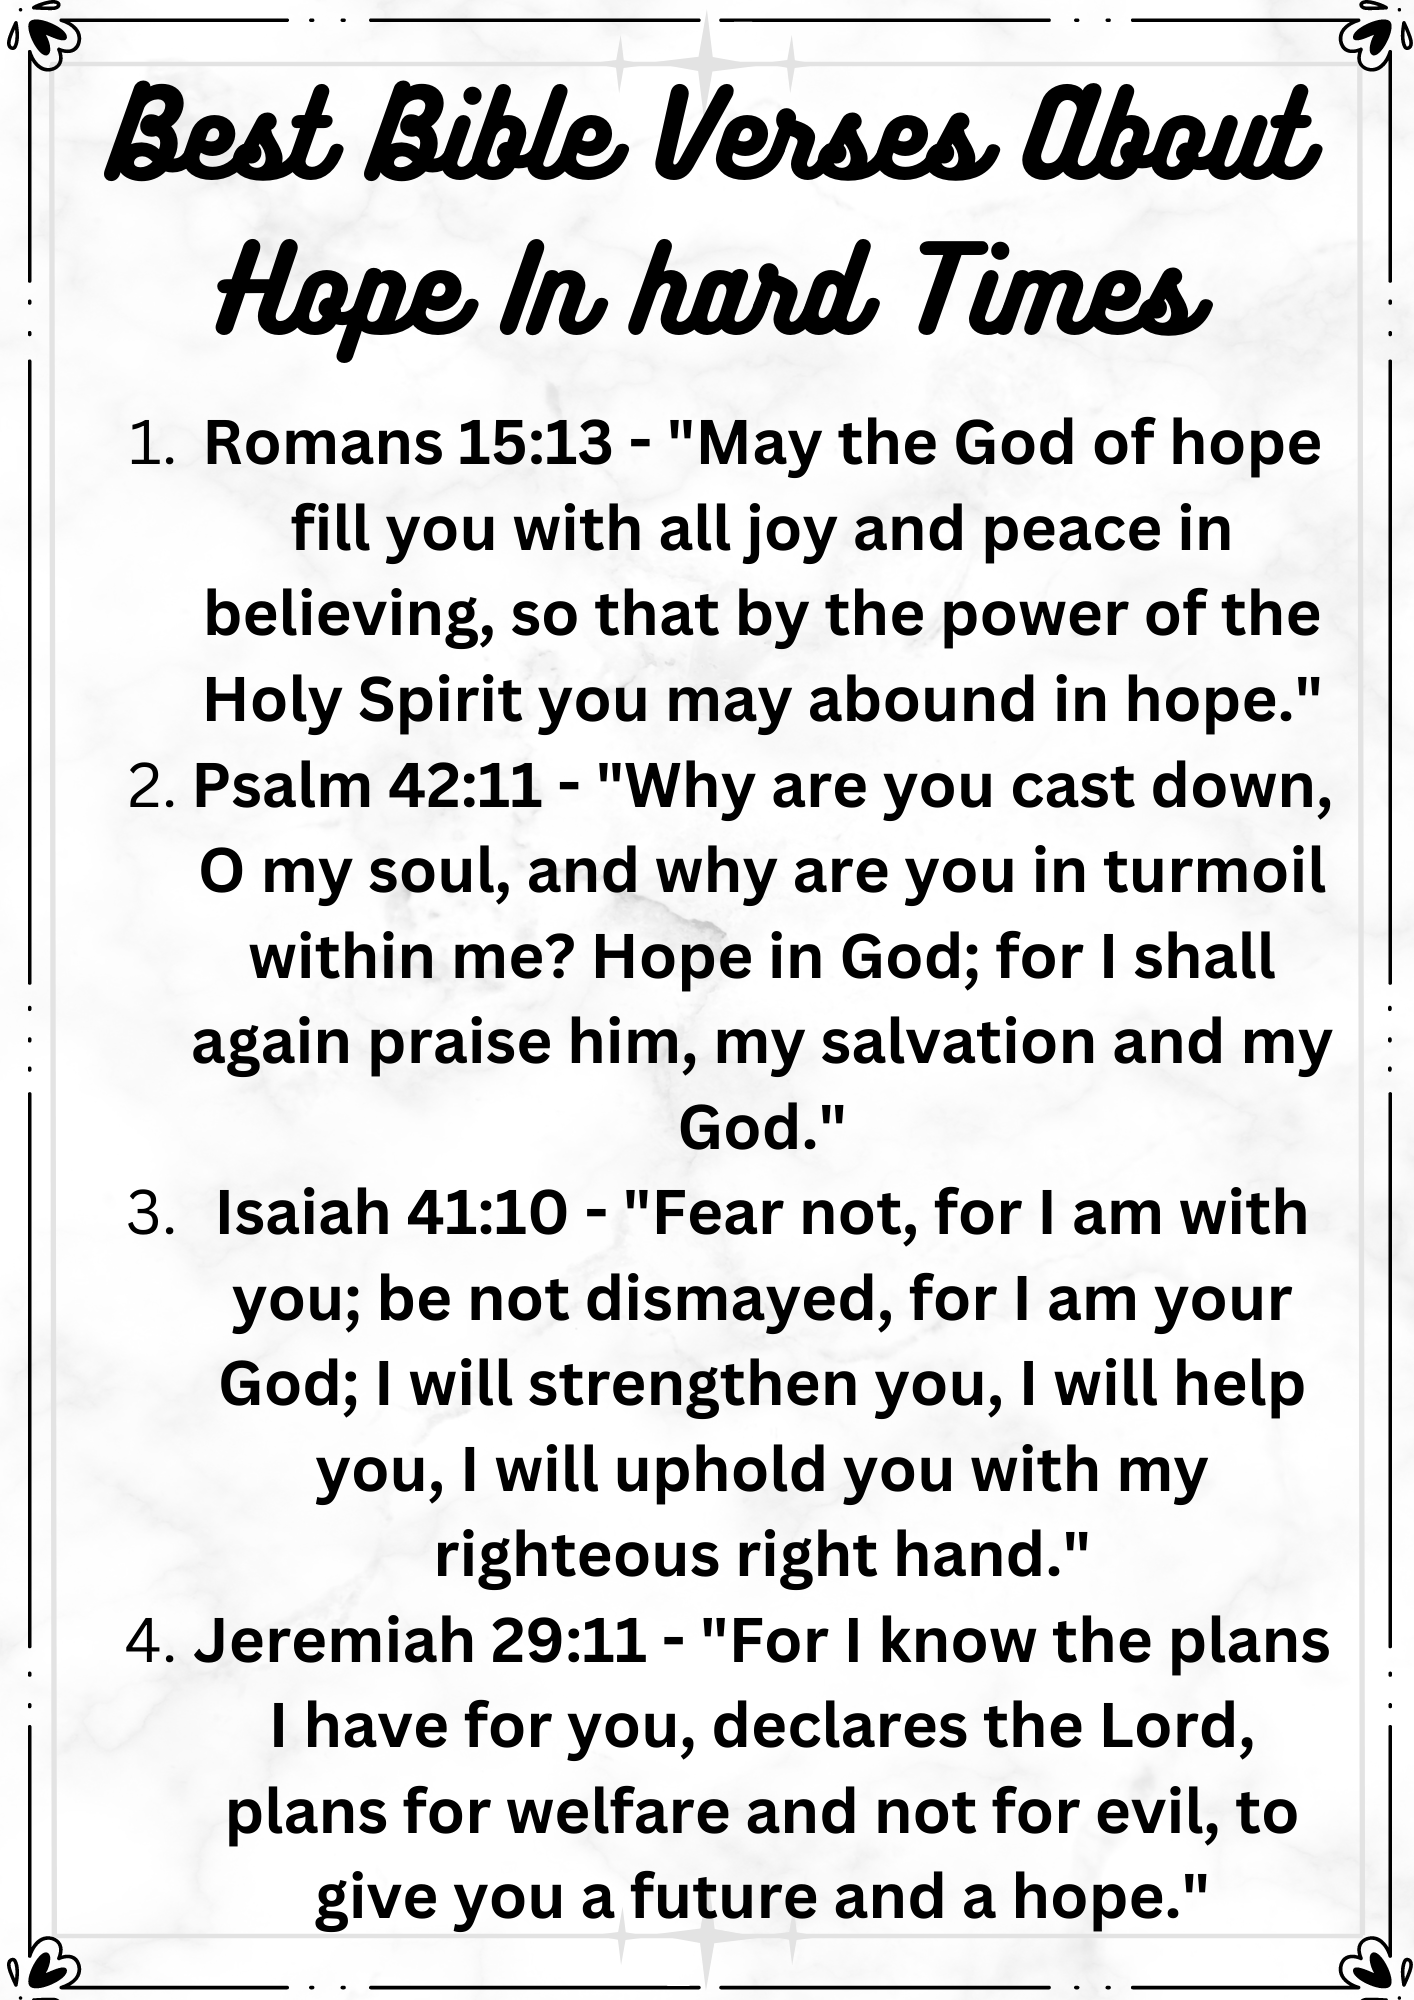 Bible Verses About Hope In hard Times